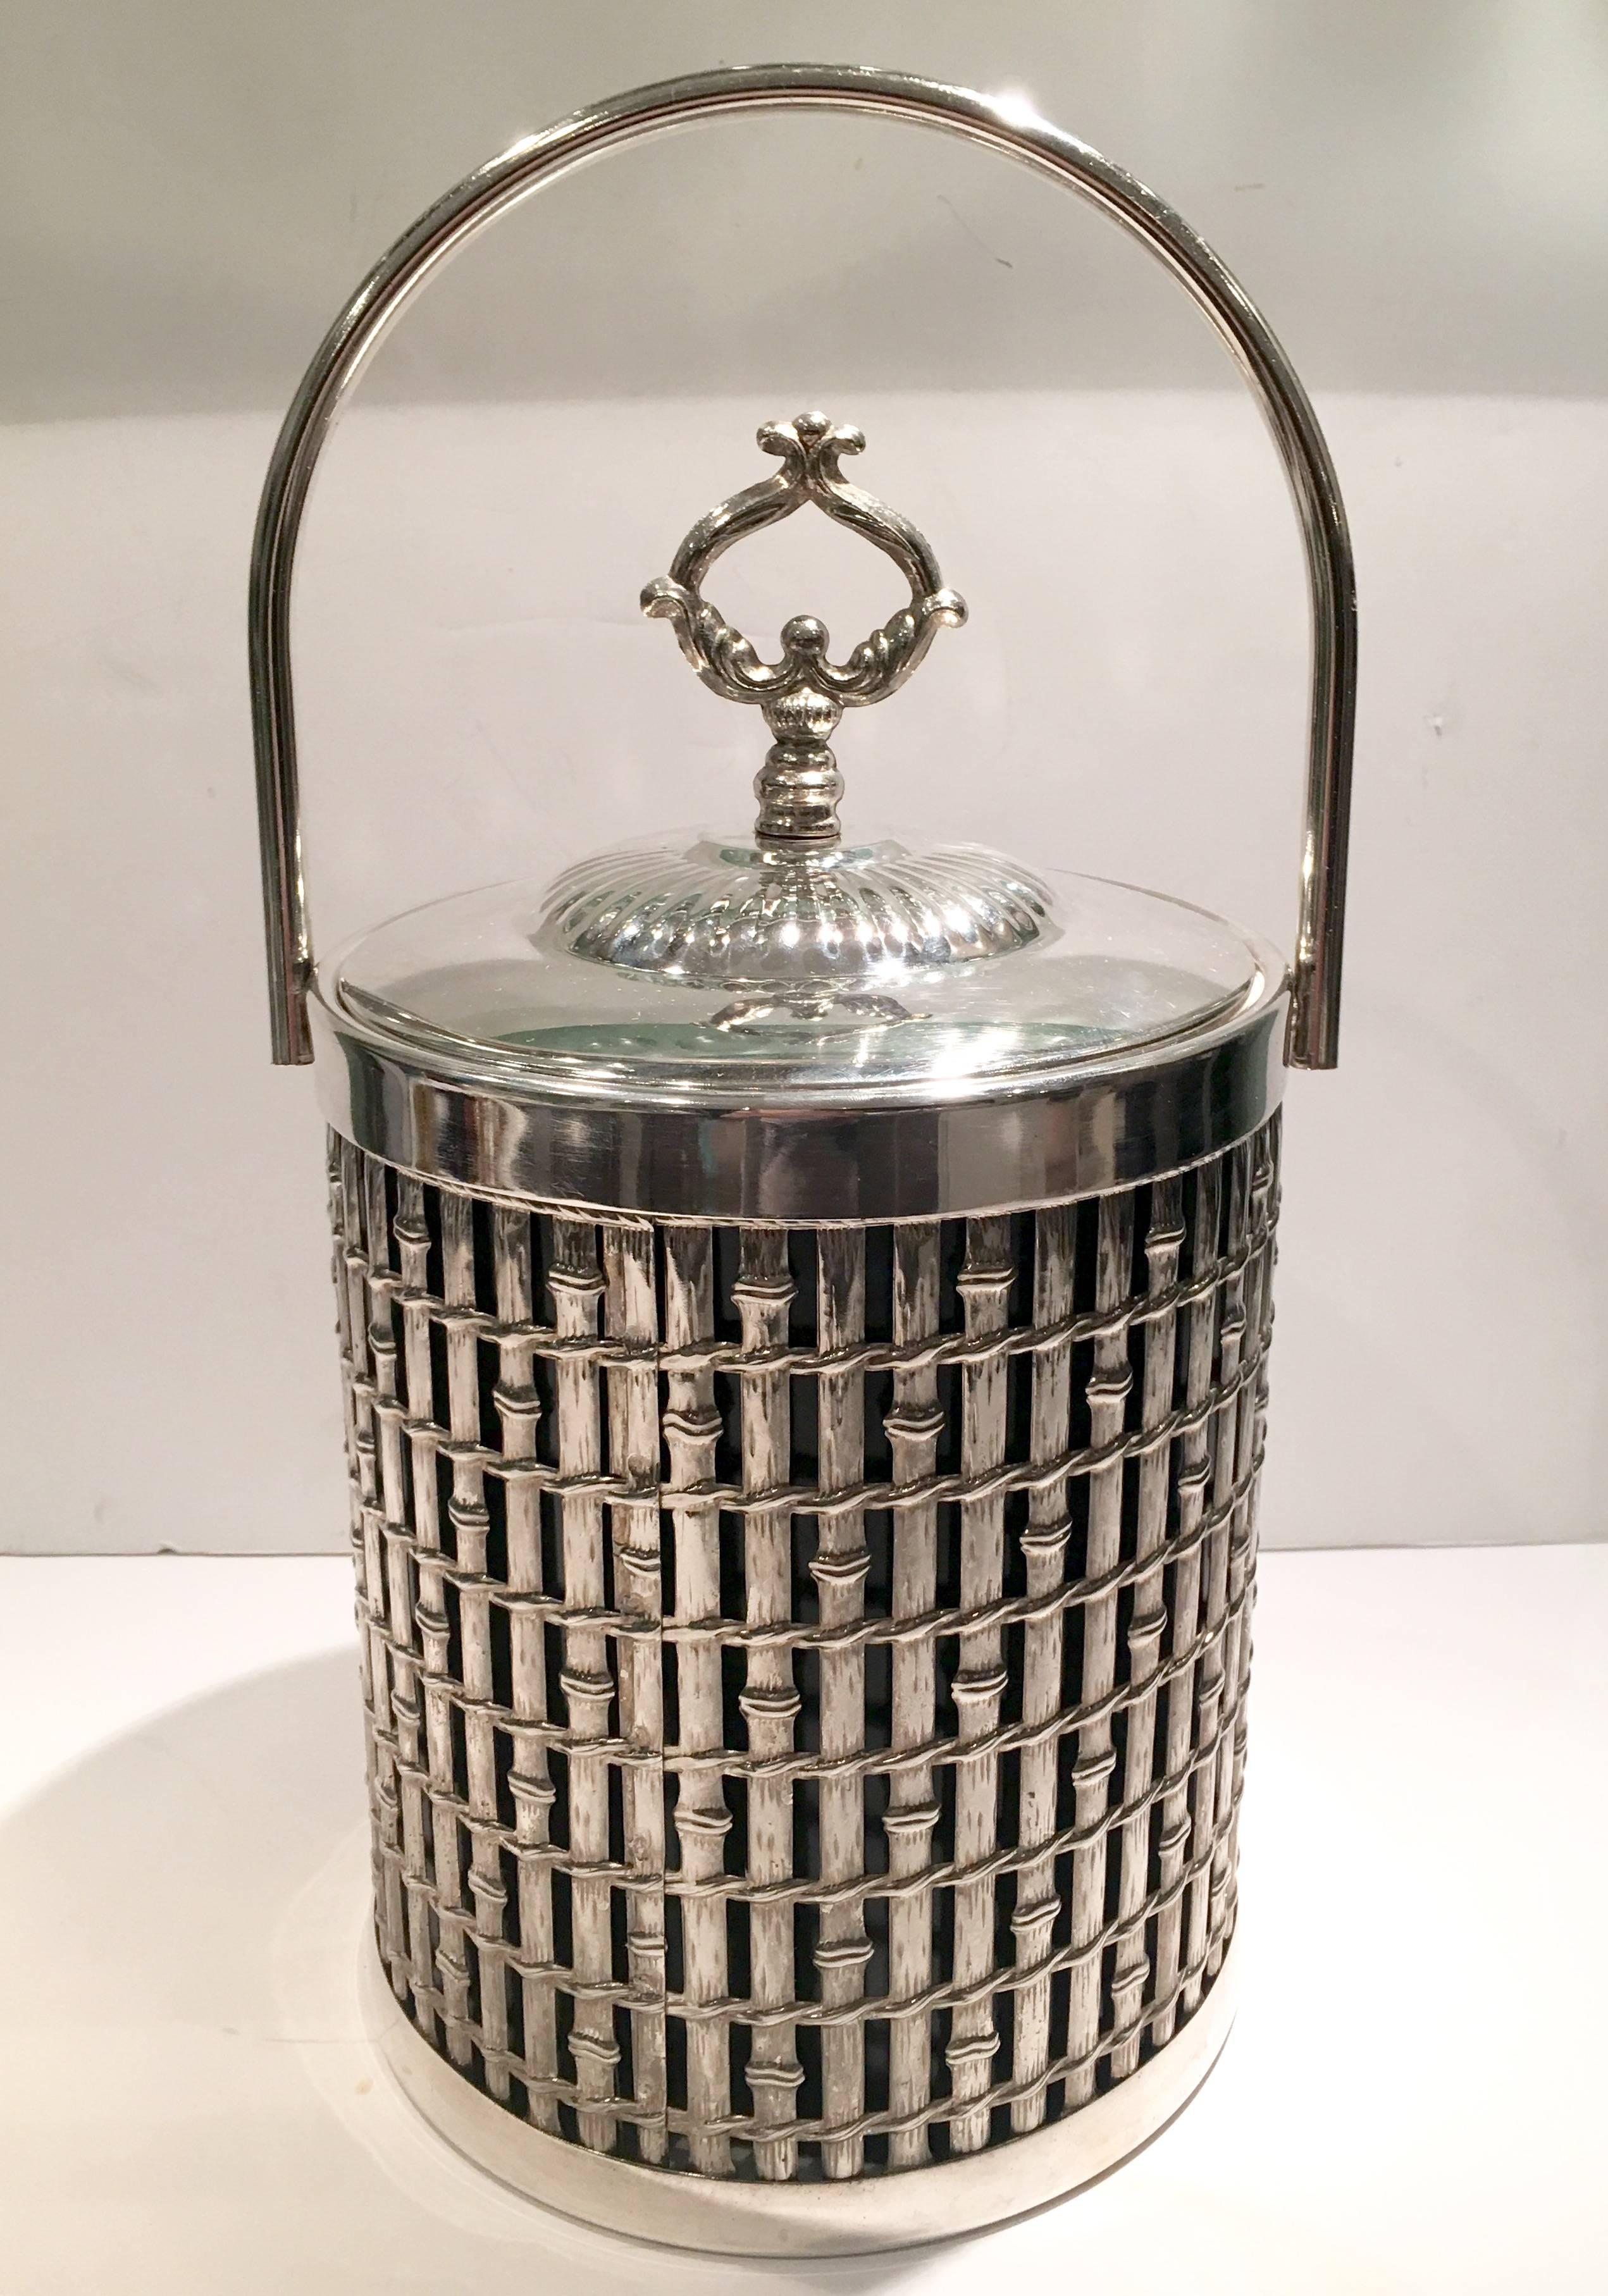 Fantastic Hollywood Regency faux bamboo lattice silver plate tubular handle and lidded ice bucket. White thermal liner. Bucket with out handle and lid height,
10.25" inches.